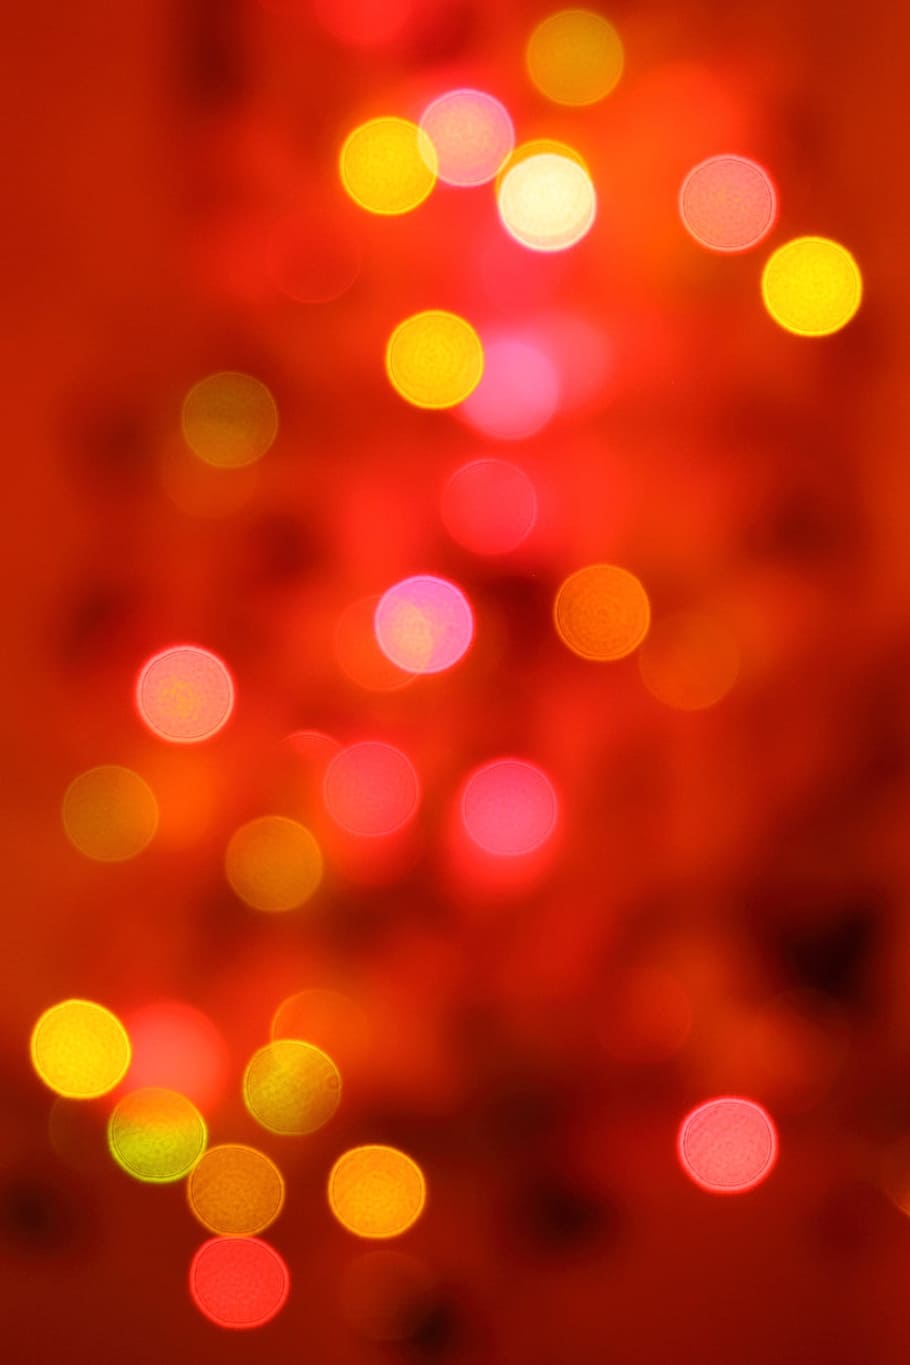 abstract, background, blur, blurred, bright, christmas, color, colorful, decoration, glow